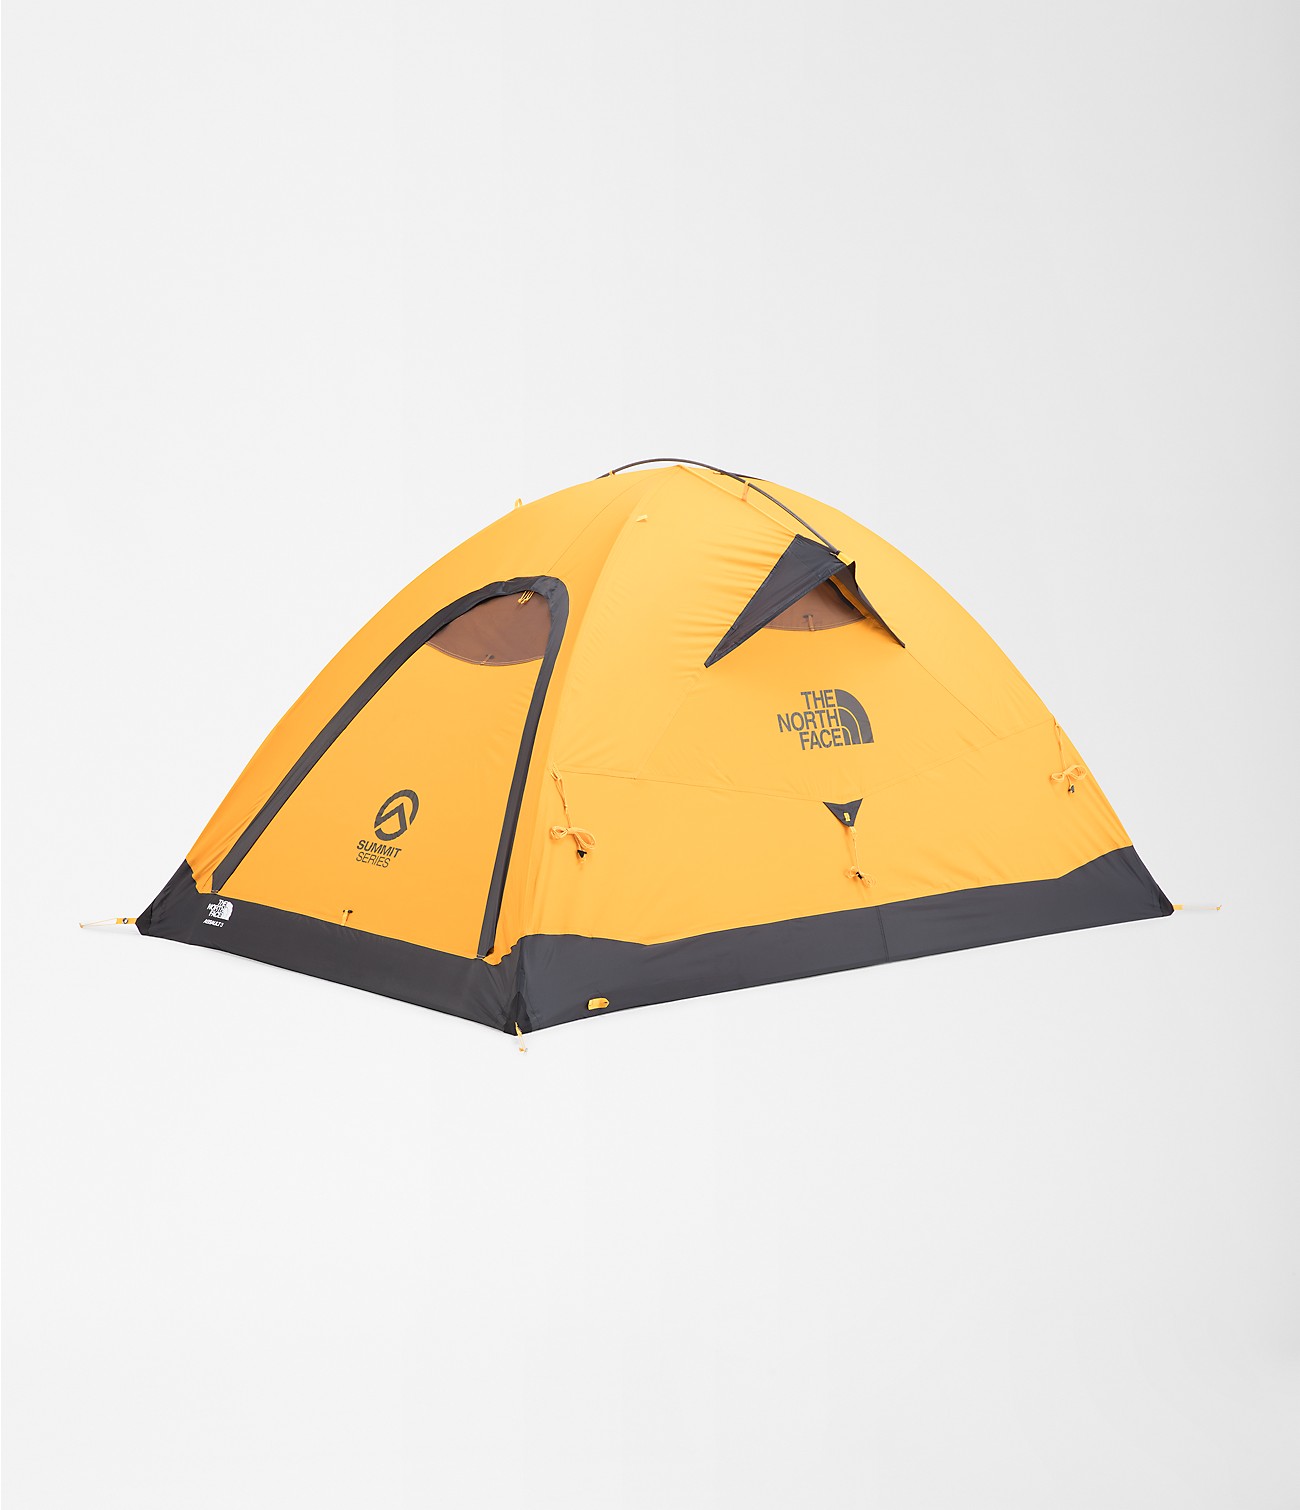 2-Meter Dome Tent The Face